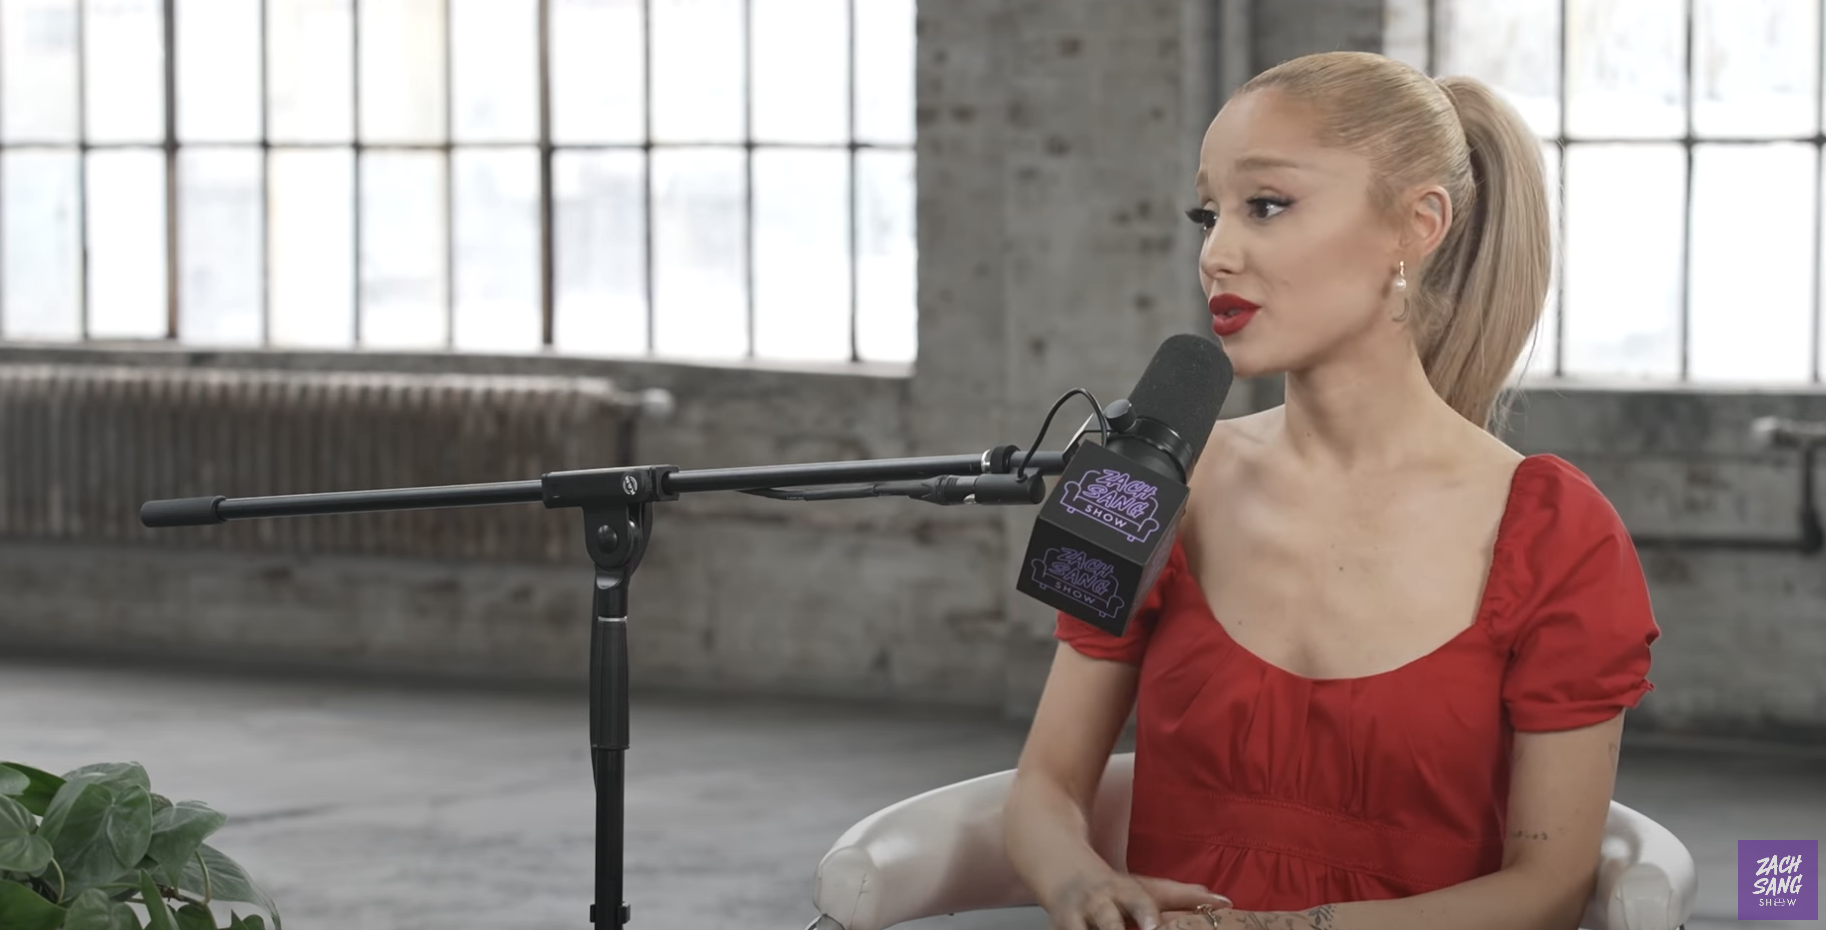 Ariana Grande in an interview wearing a dress with puffed sleeves, sitting in a warehouse